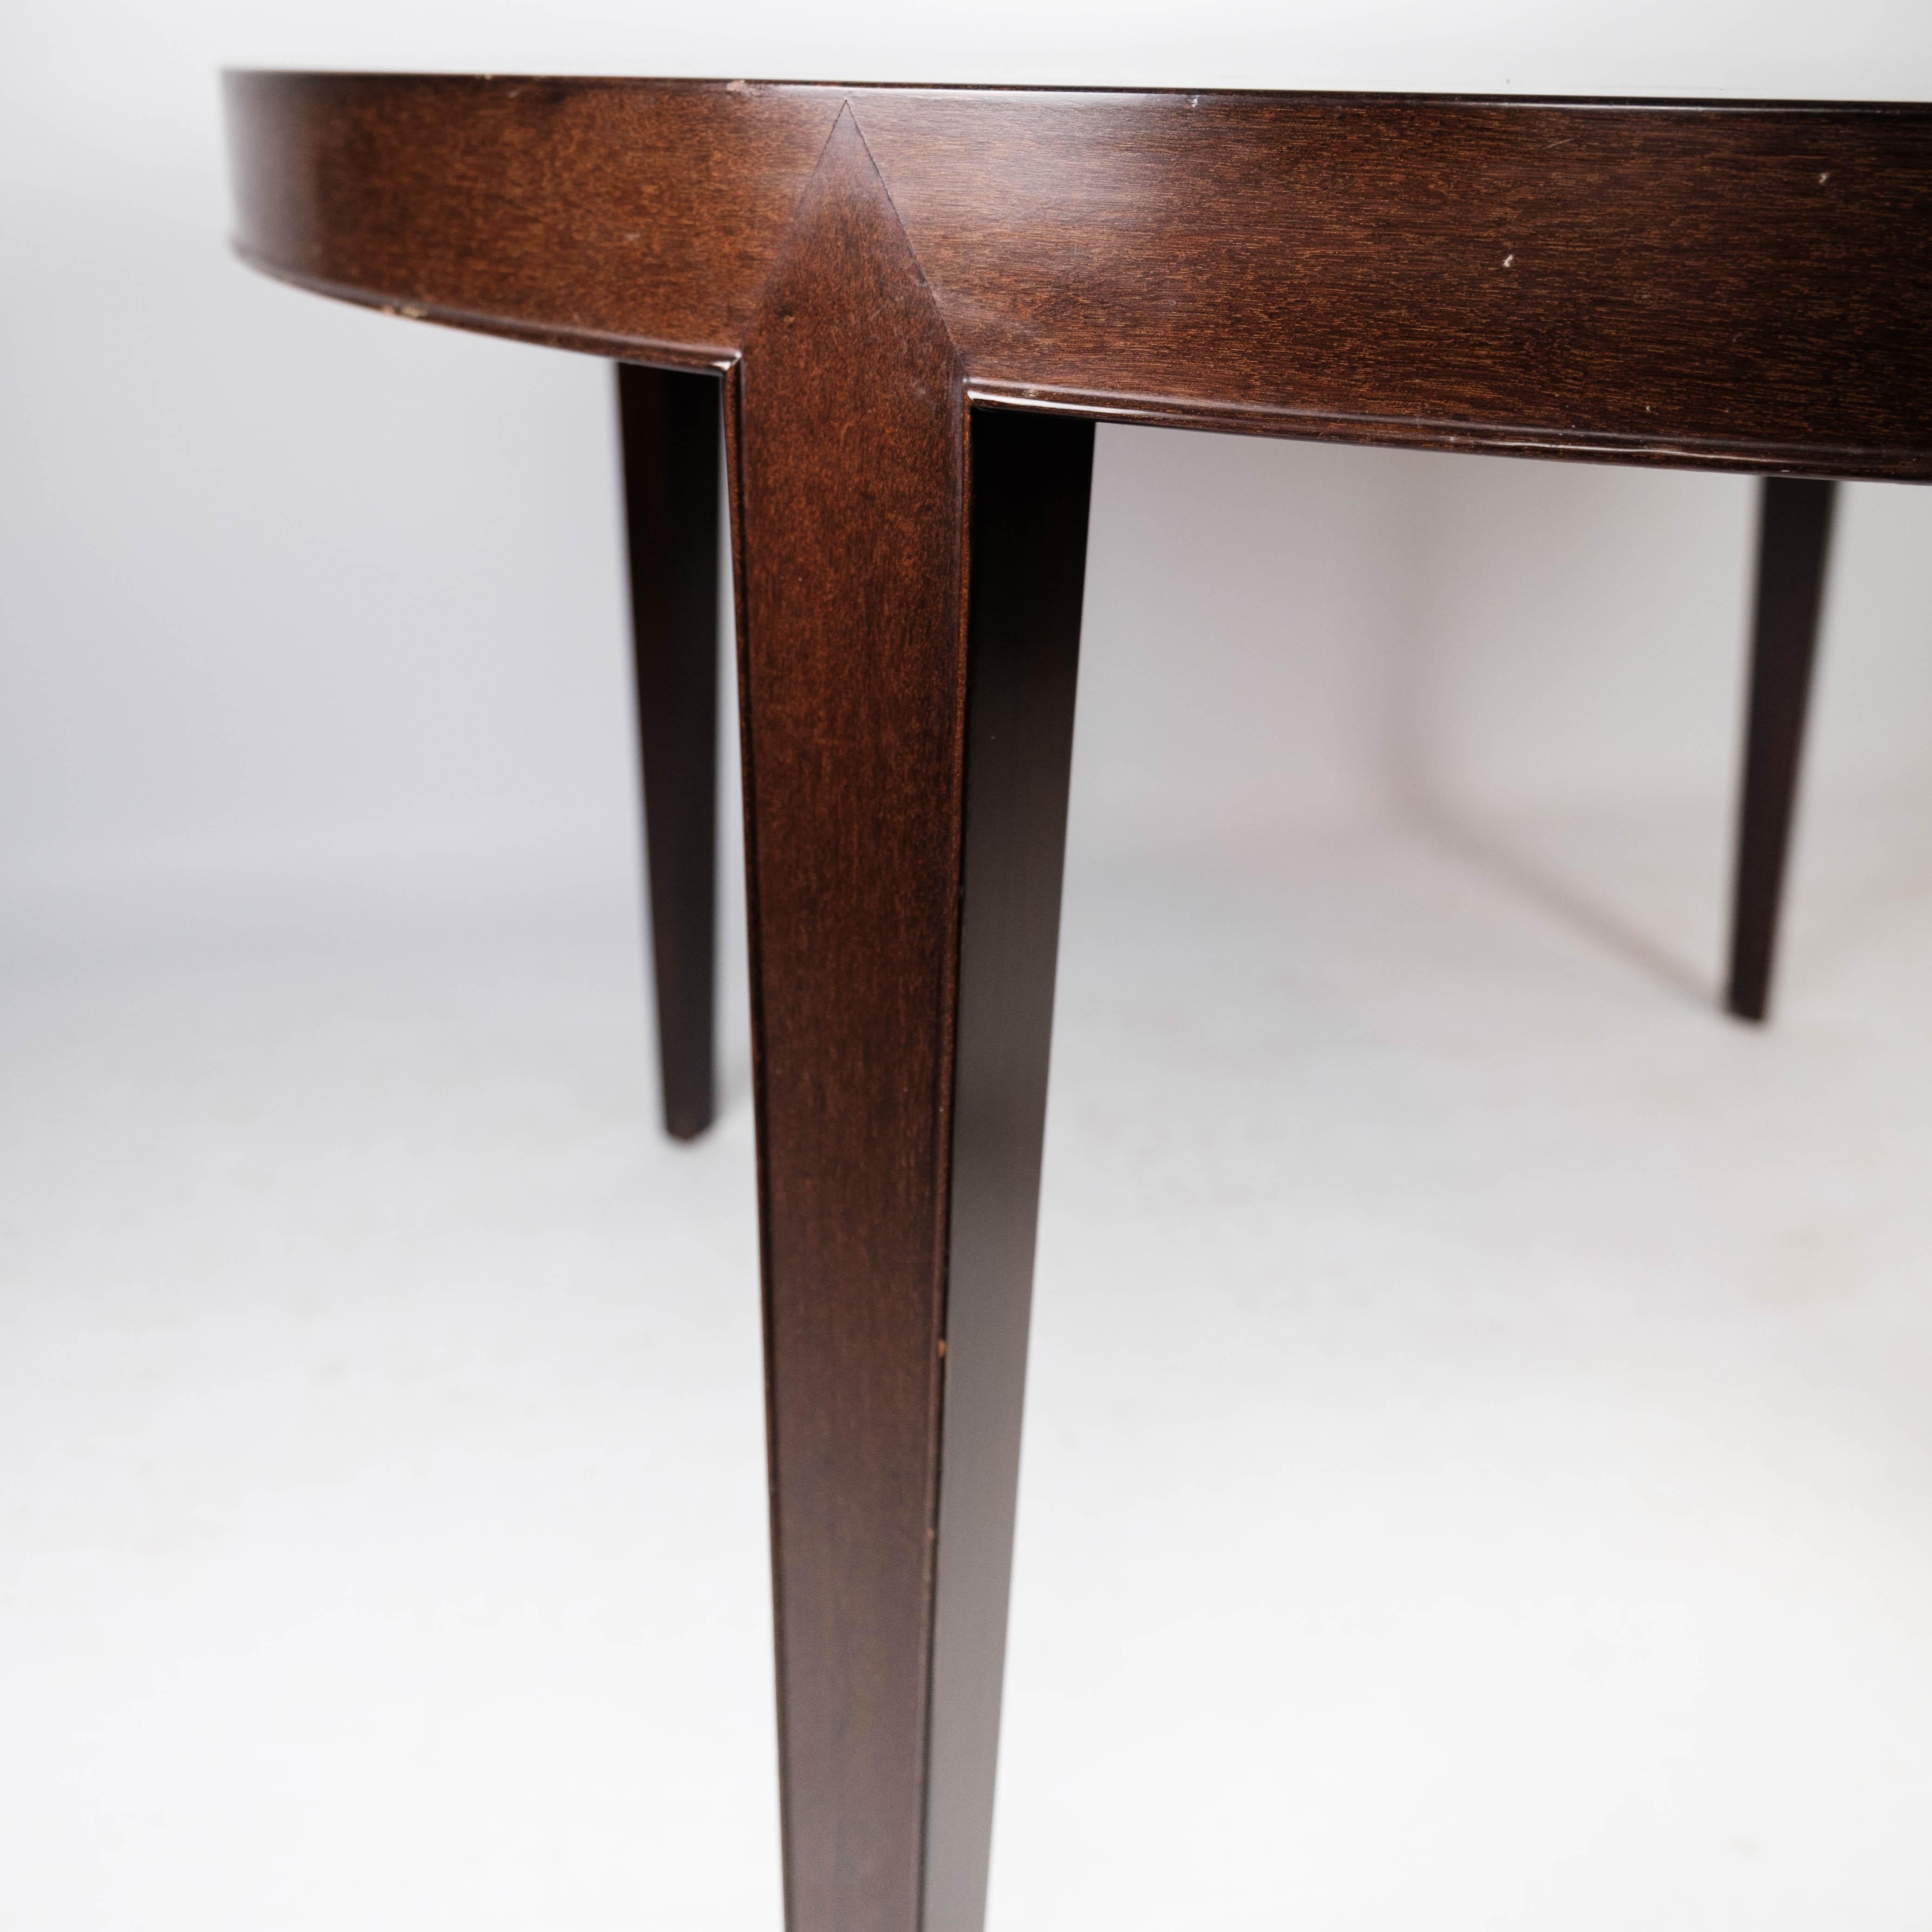 Scandinavian Modern Dining Table in Mahogany, of Danish Design Manufactued by Haslev Furniture, 1960